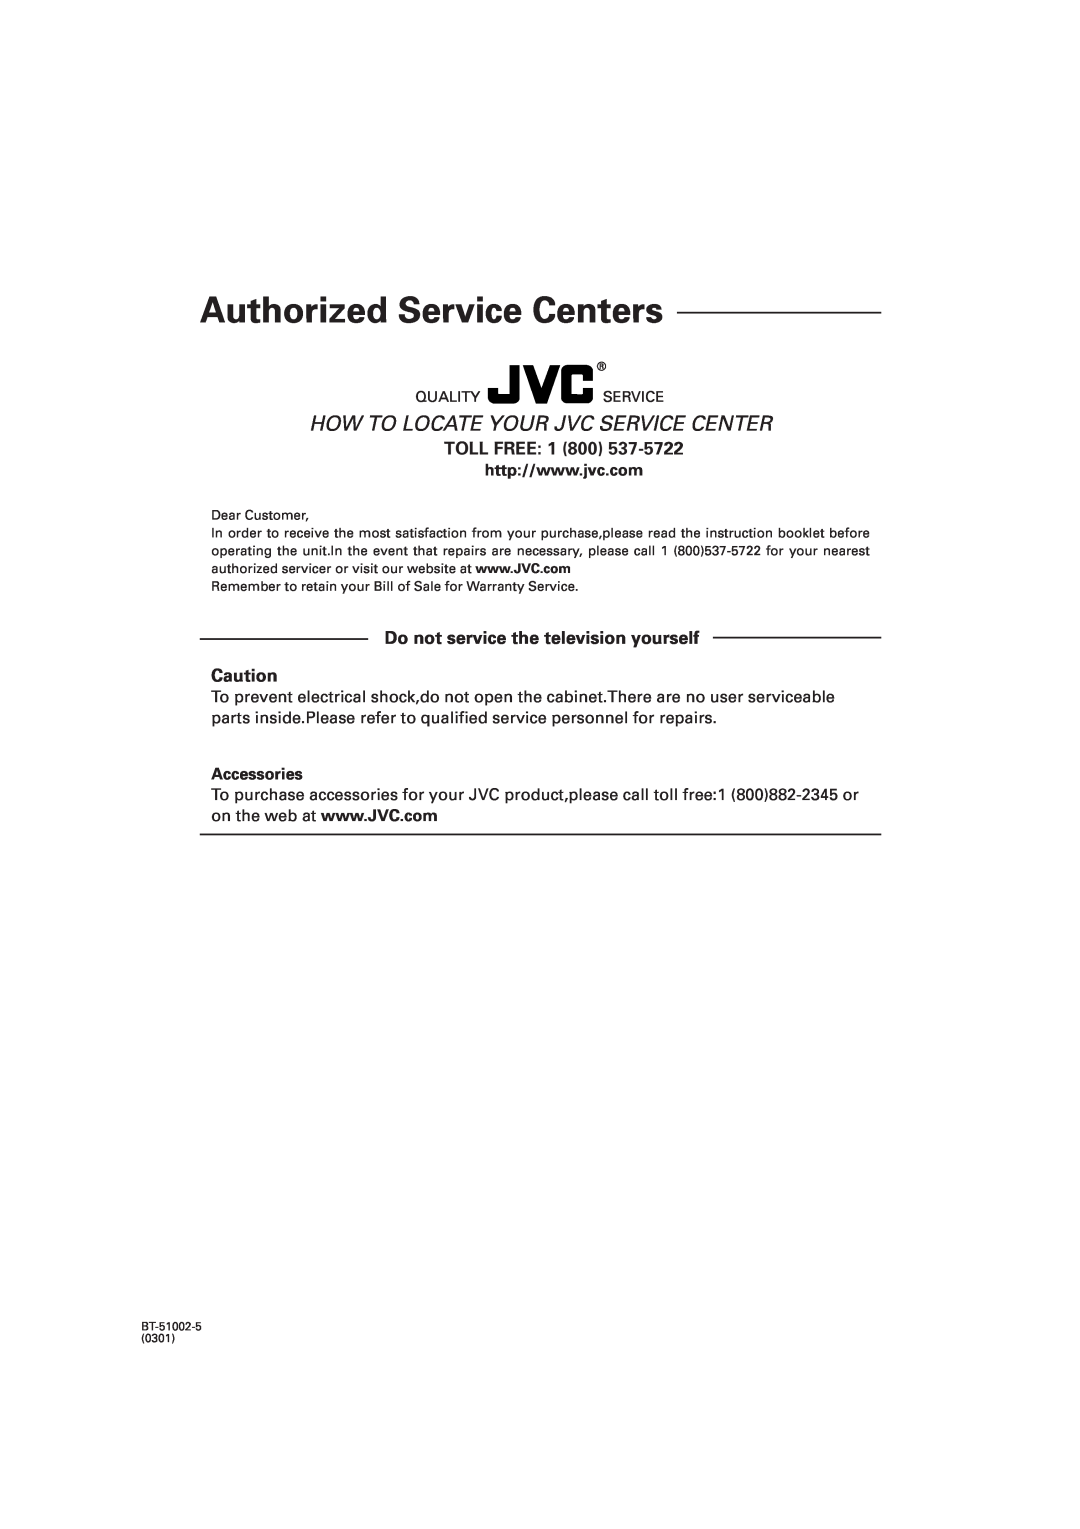 JVC RX-DP10VBK manual Accessories, Authorized Service Centers, How To Locate Your Jvc Service Center, TOLL FREE: 1 800 